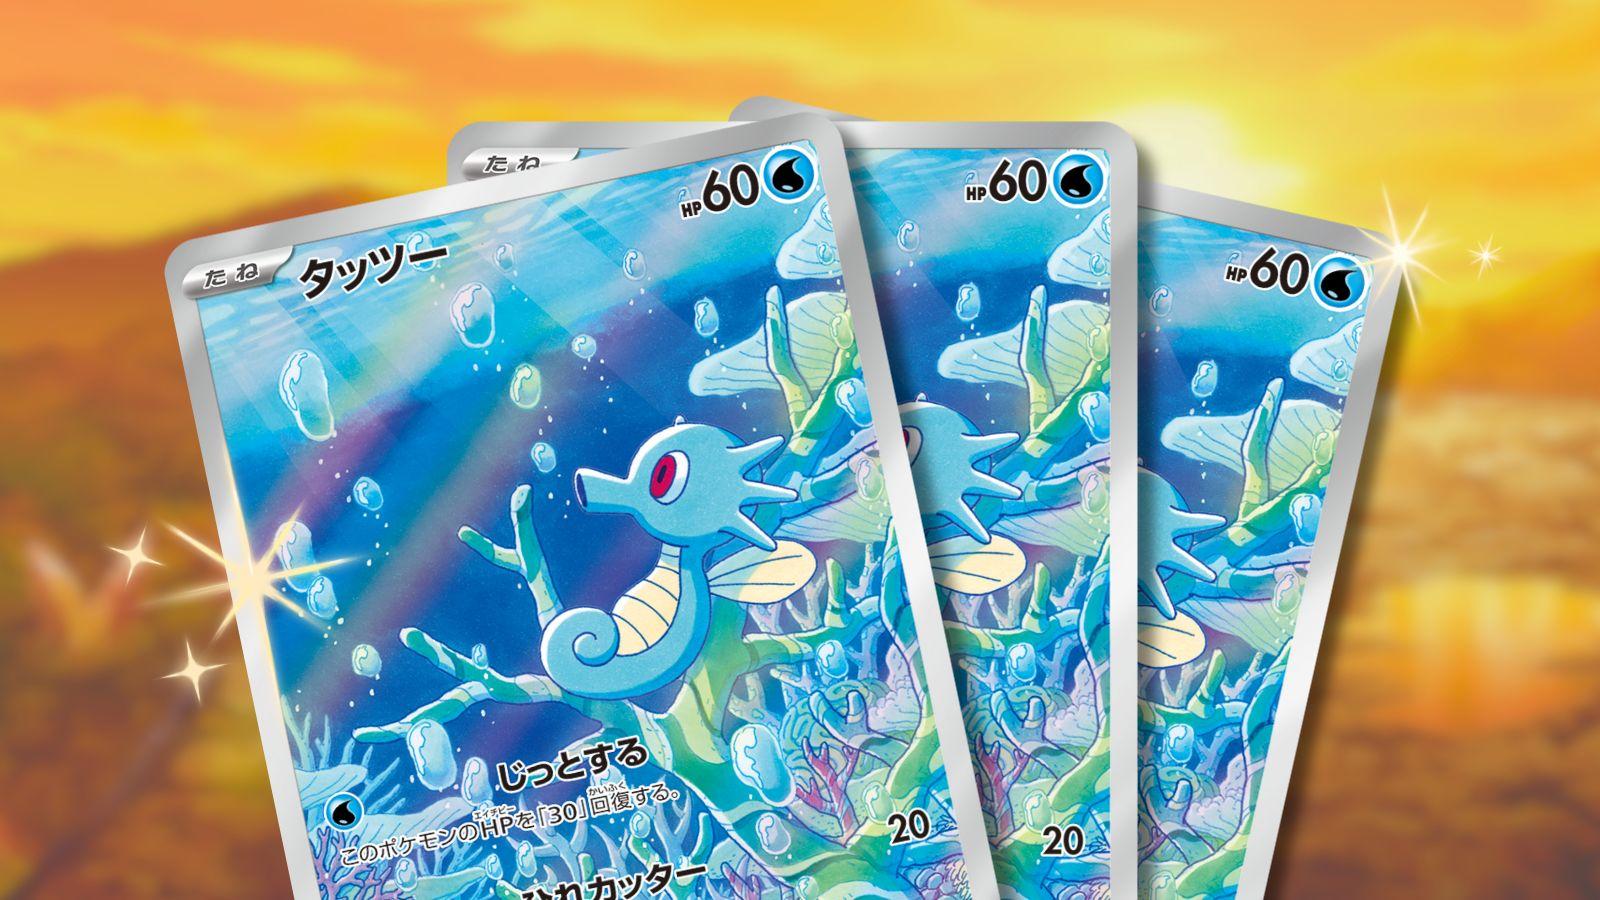 Horsea Pokemon card with sparkles and anime background.